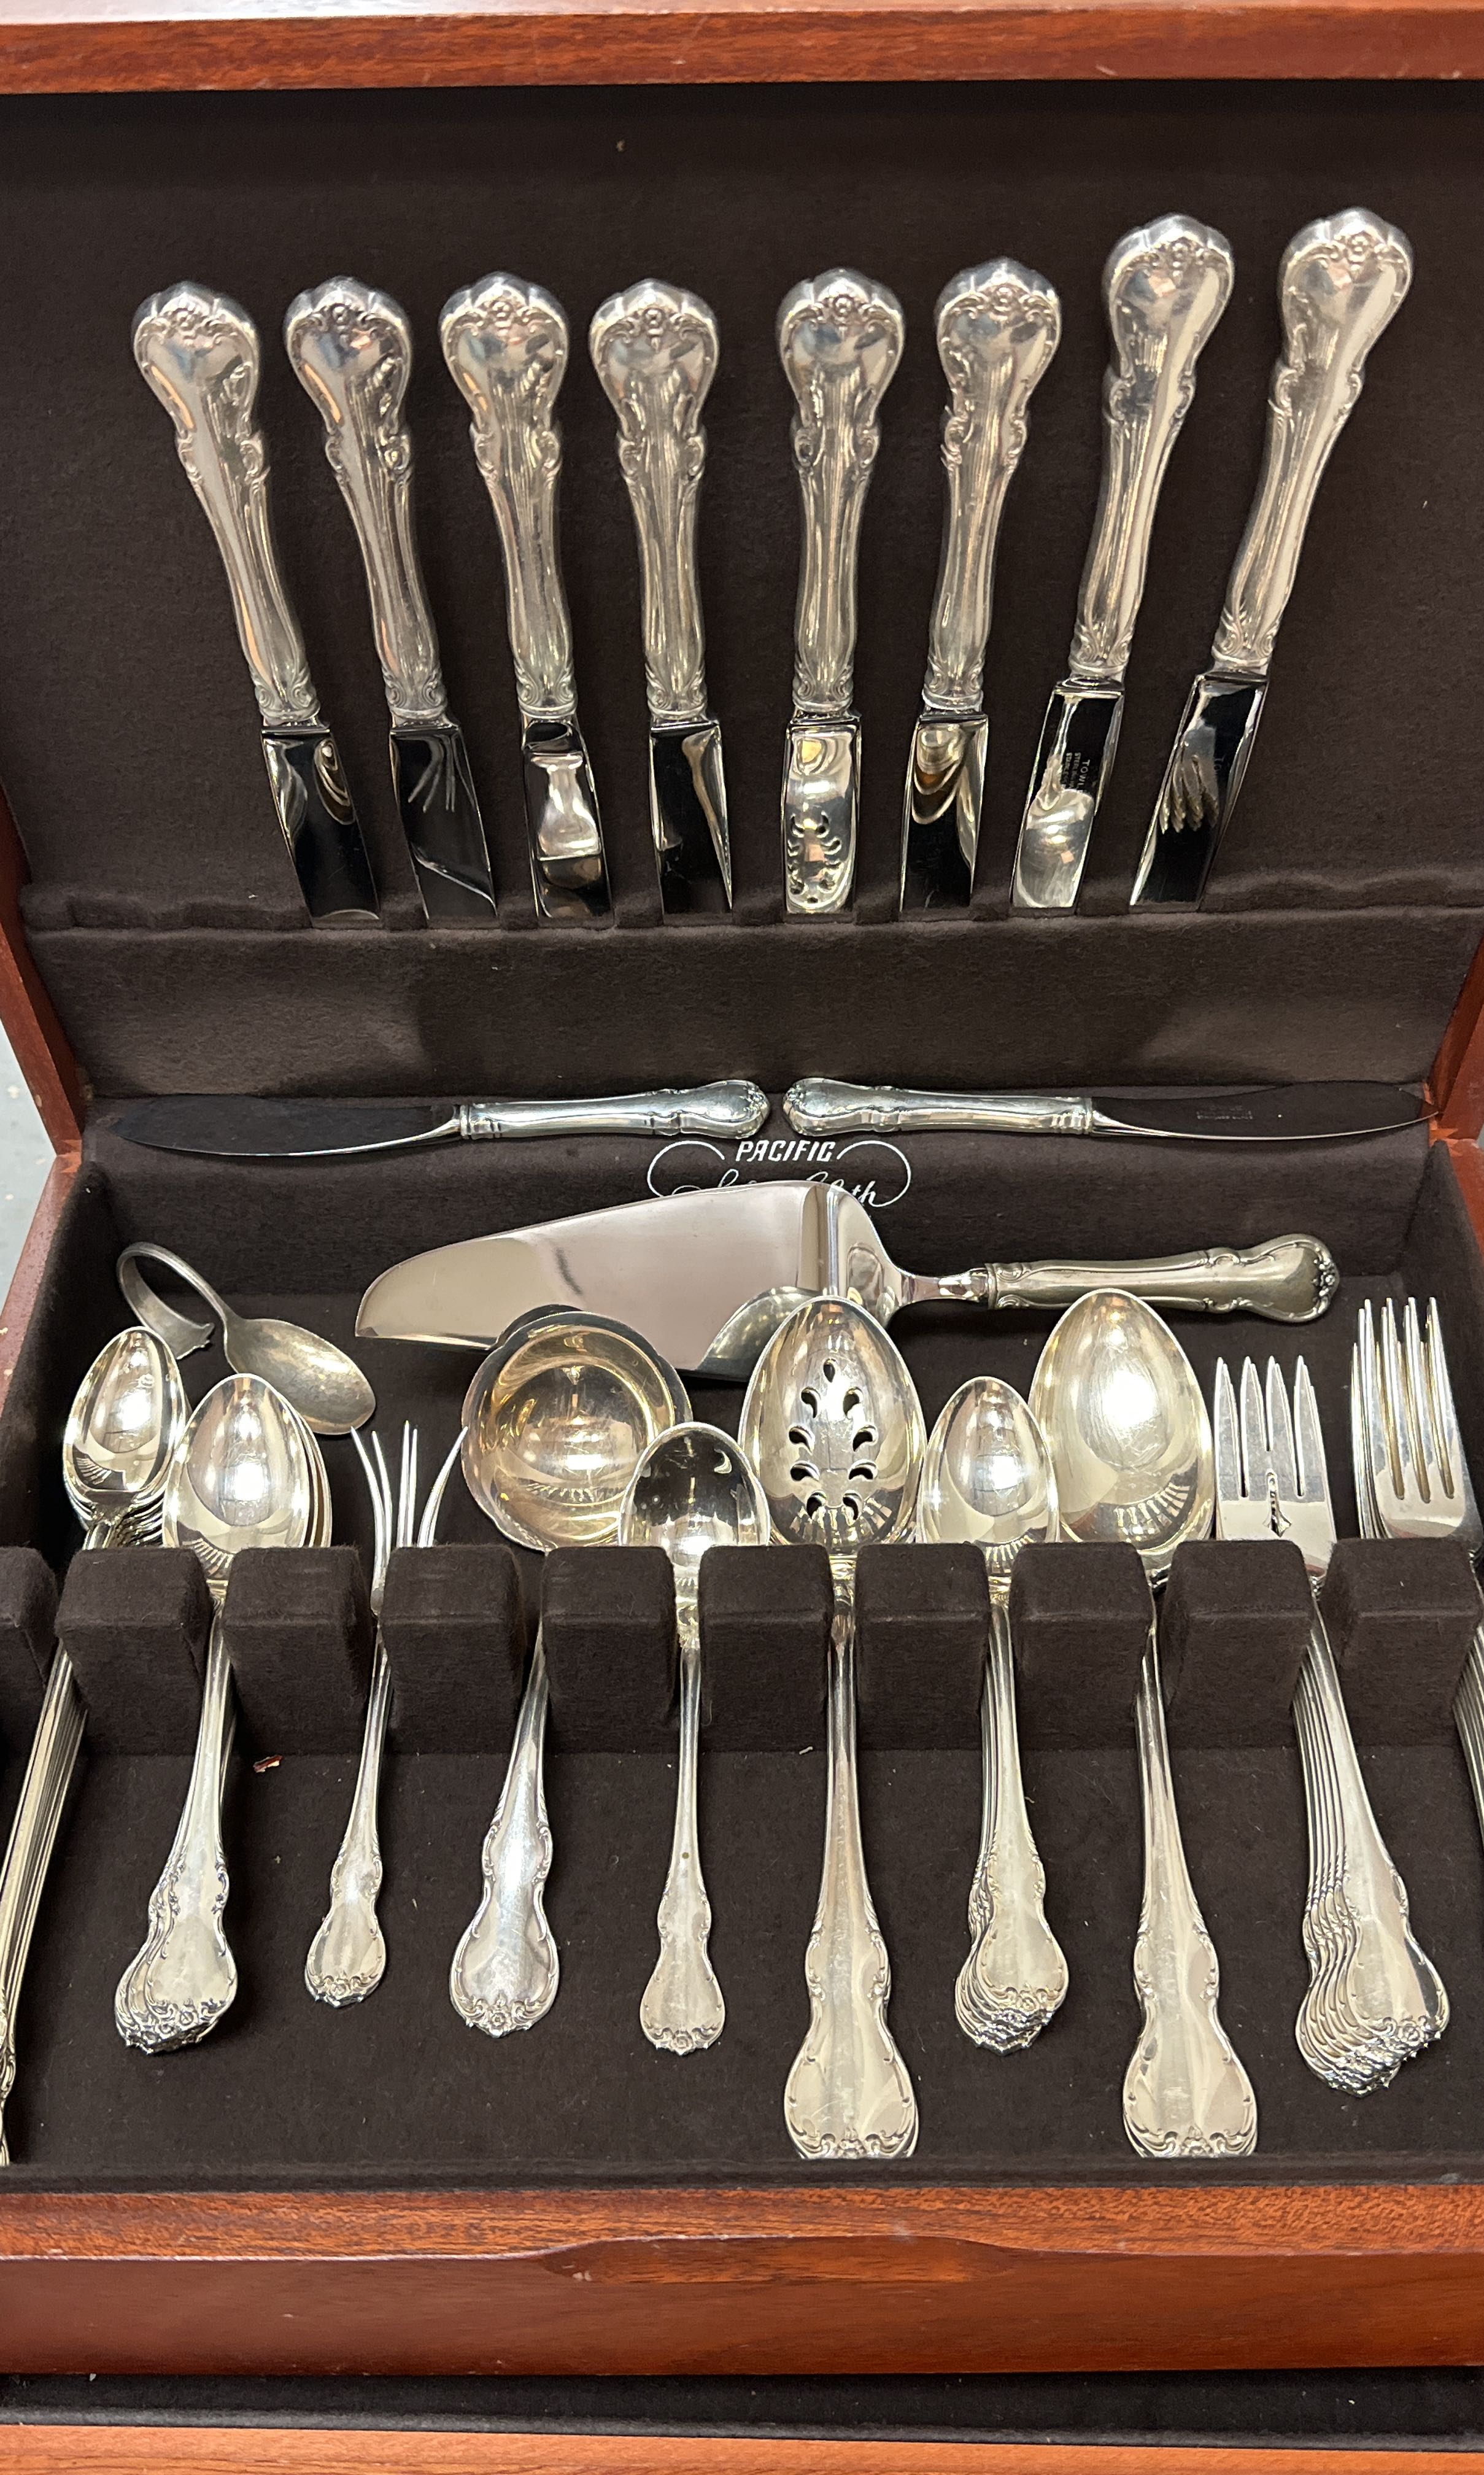 Vintage Flatware Set, MCM Floral Stainless Silverware Set by Towle